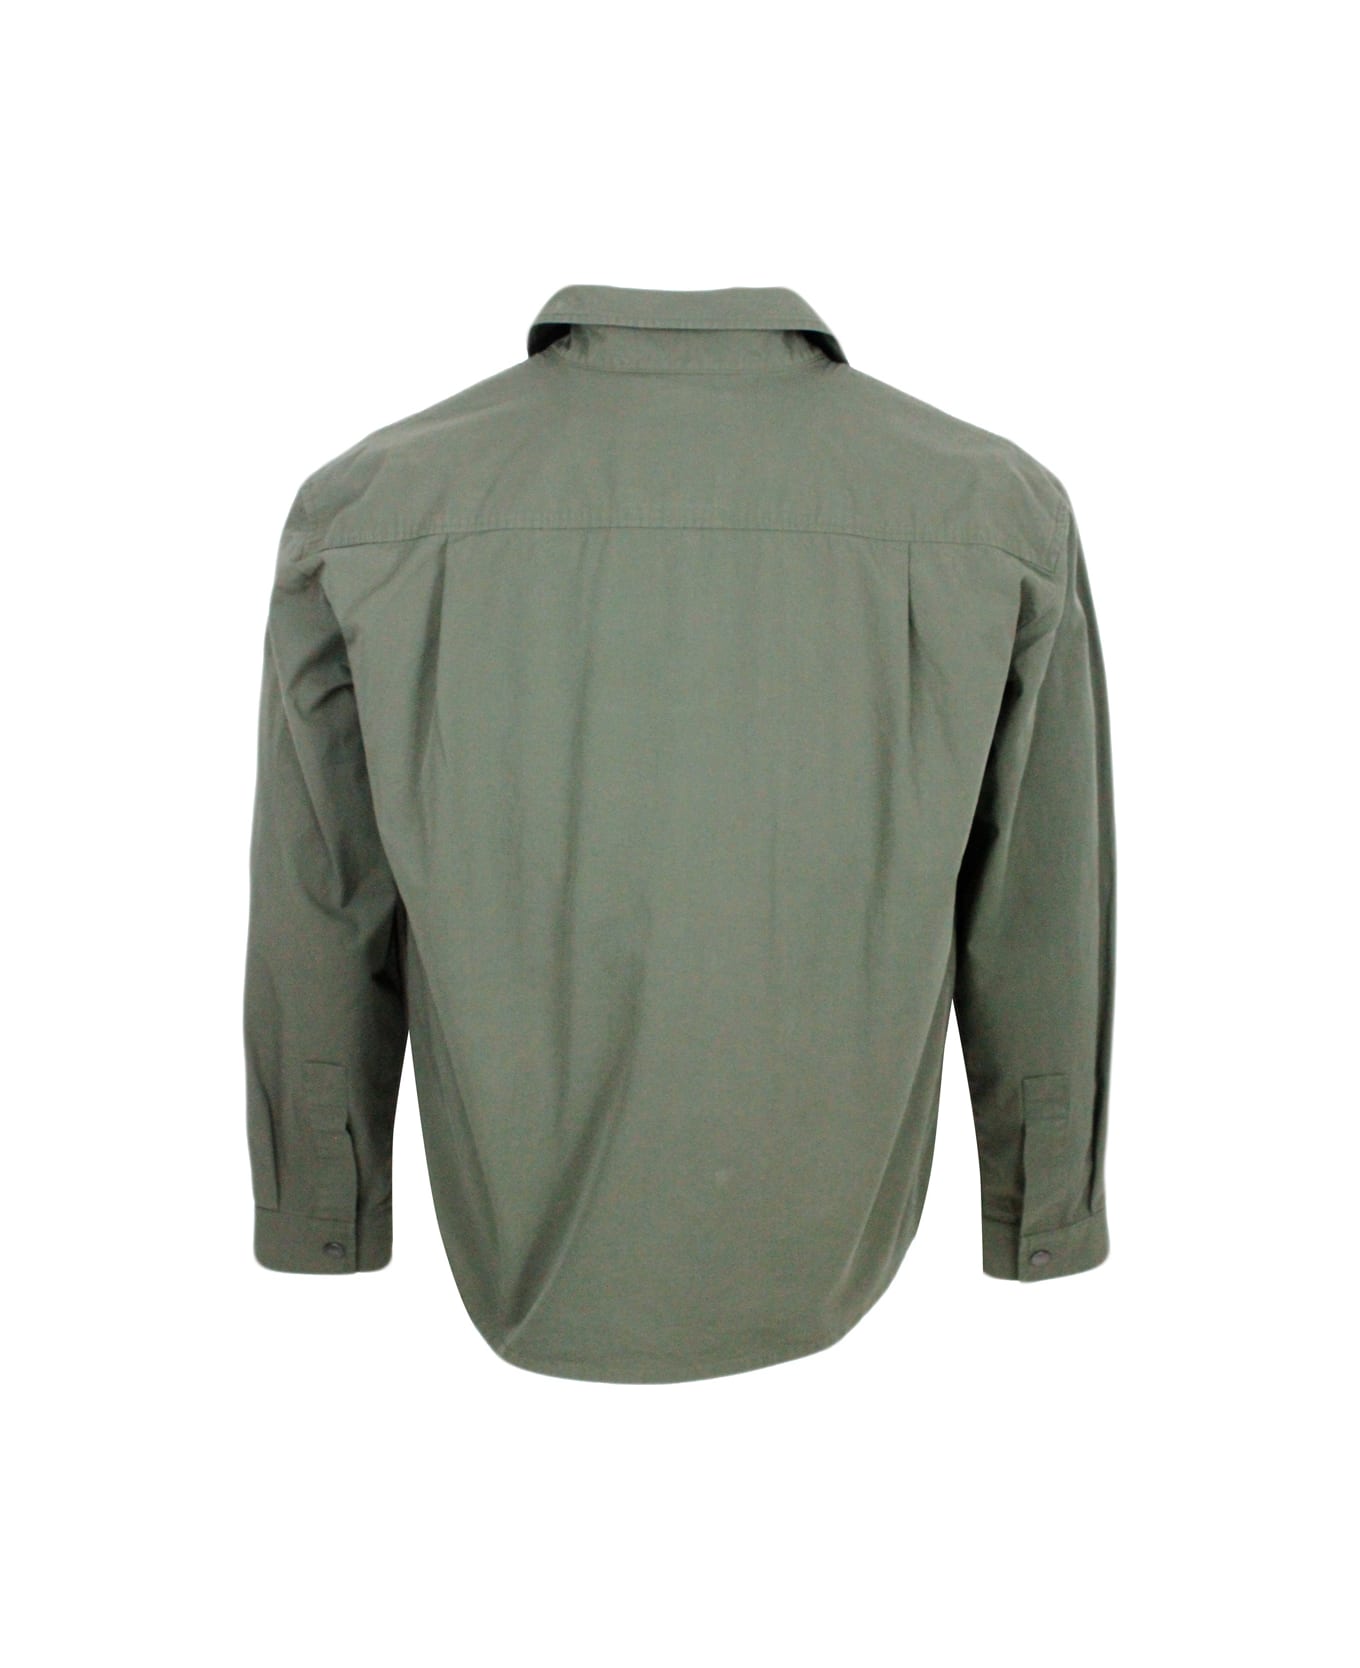 Add Recycled Nylon Shirt Jacket With Detachable Internal Padded Vest. - Green